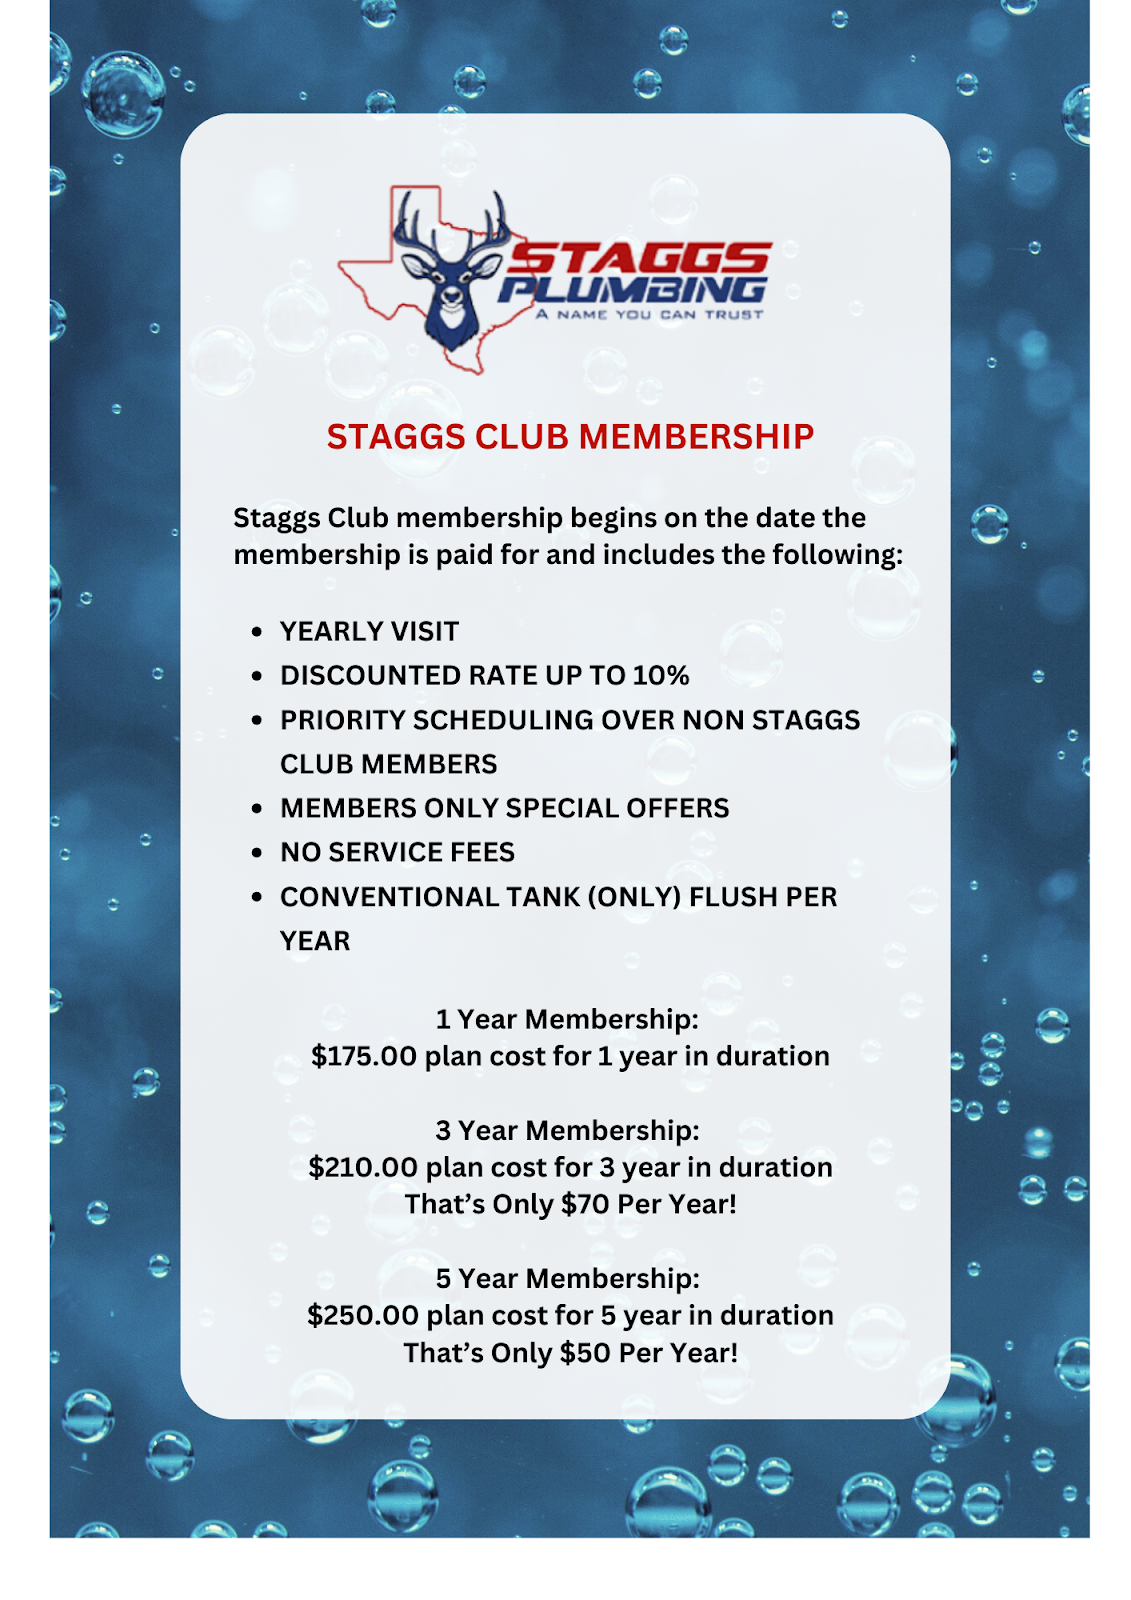 C:\Users\OWNER\Downloads\STAGGS CLUB MEMBERSHIP Staggs Club membership begins on the date the membership is paid for and includes the following üYEARLY VISIT üDISCOUNTED RATE UP TO 10% üPRIORITY SCHEDULING OVER NON STAGGS (1).png